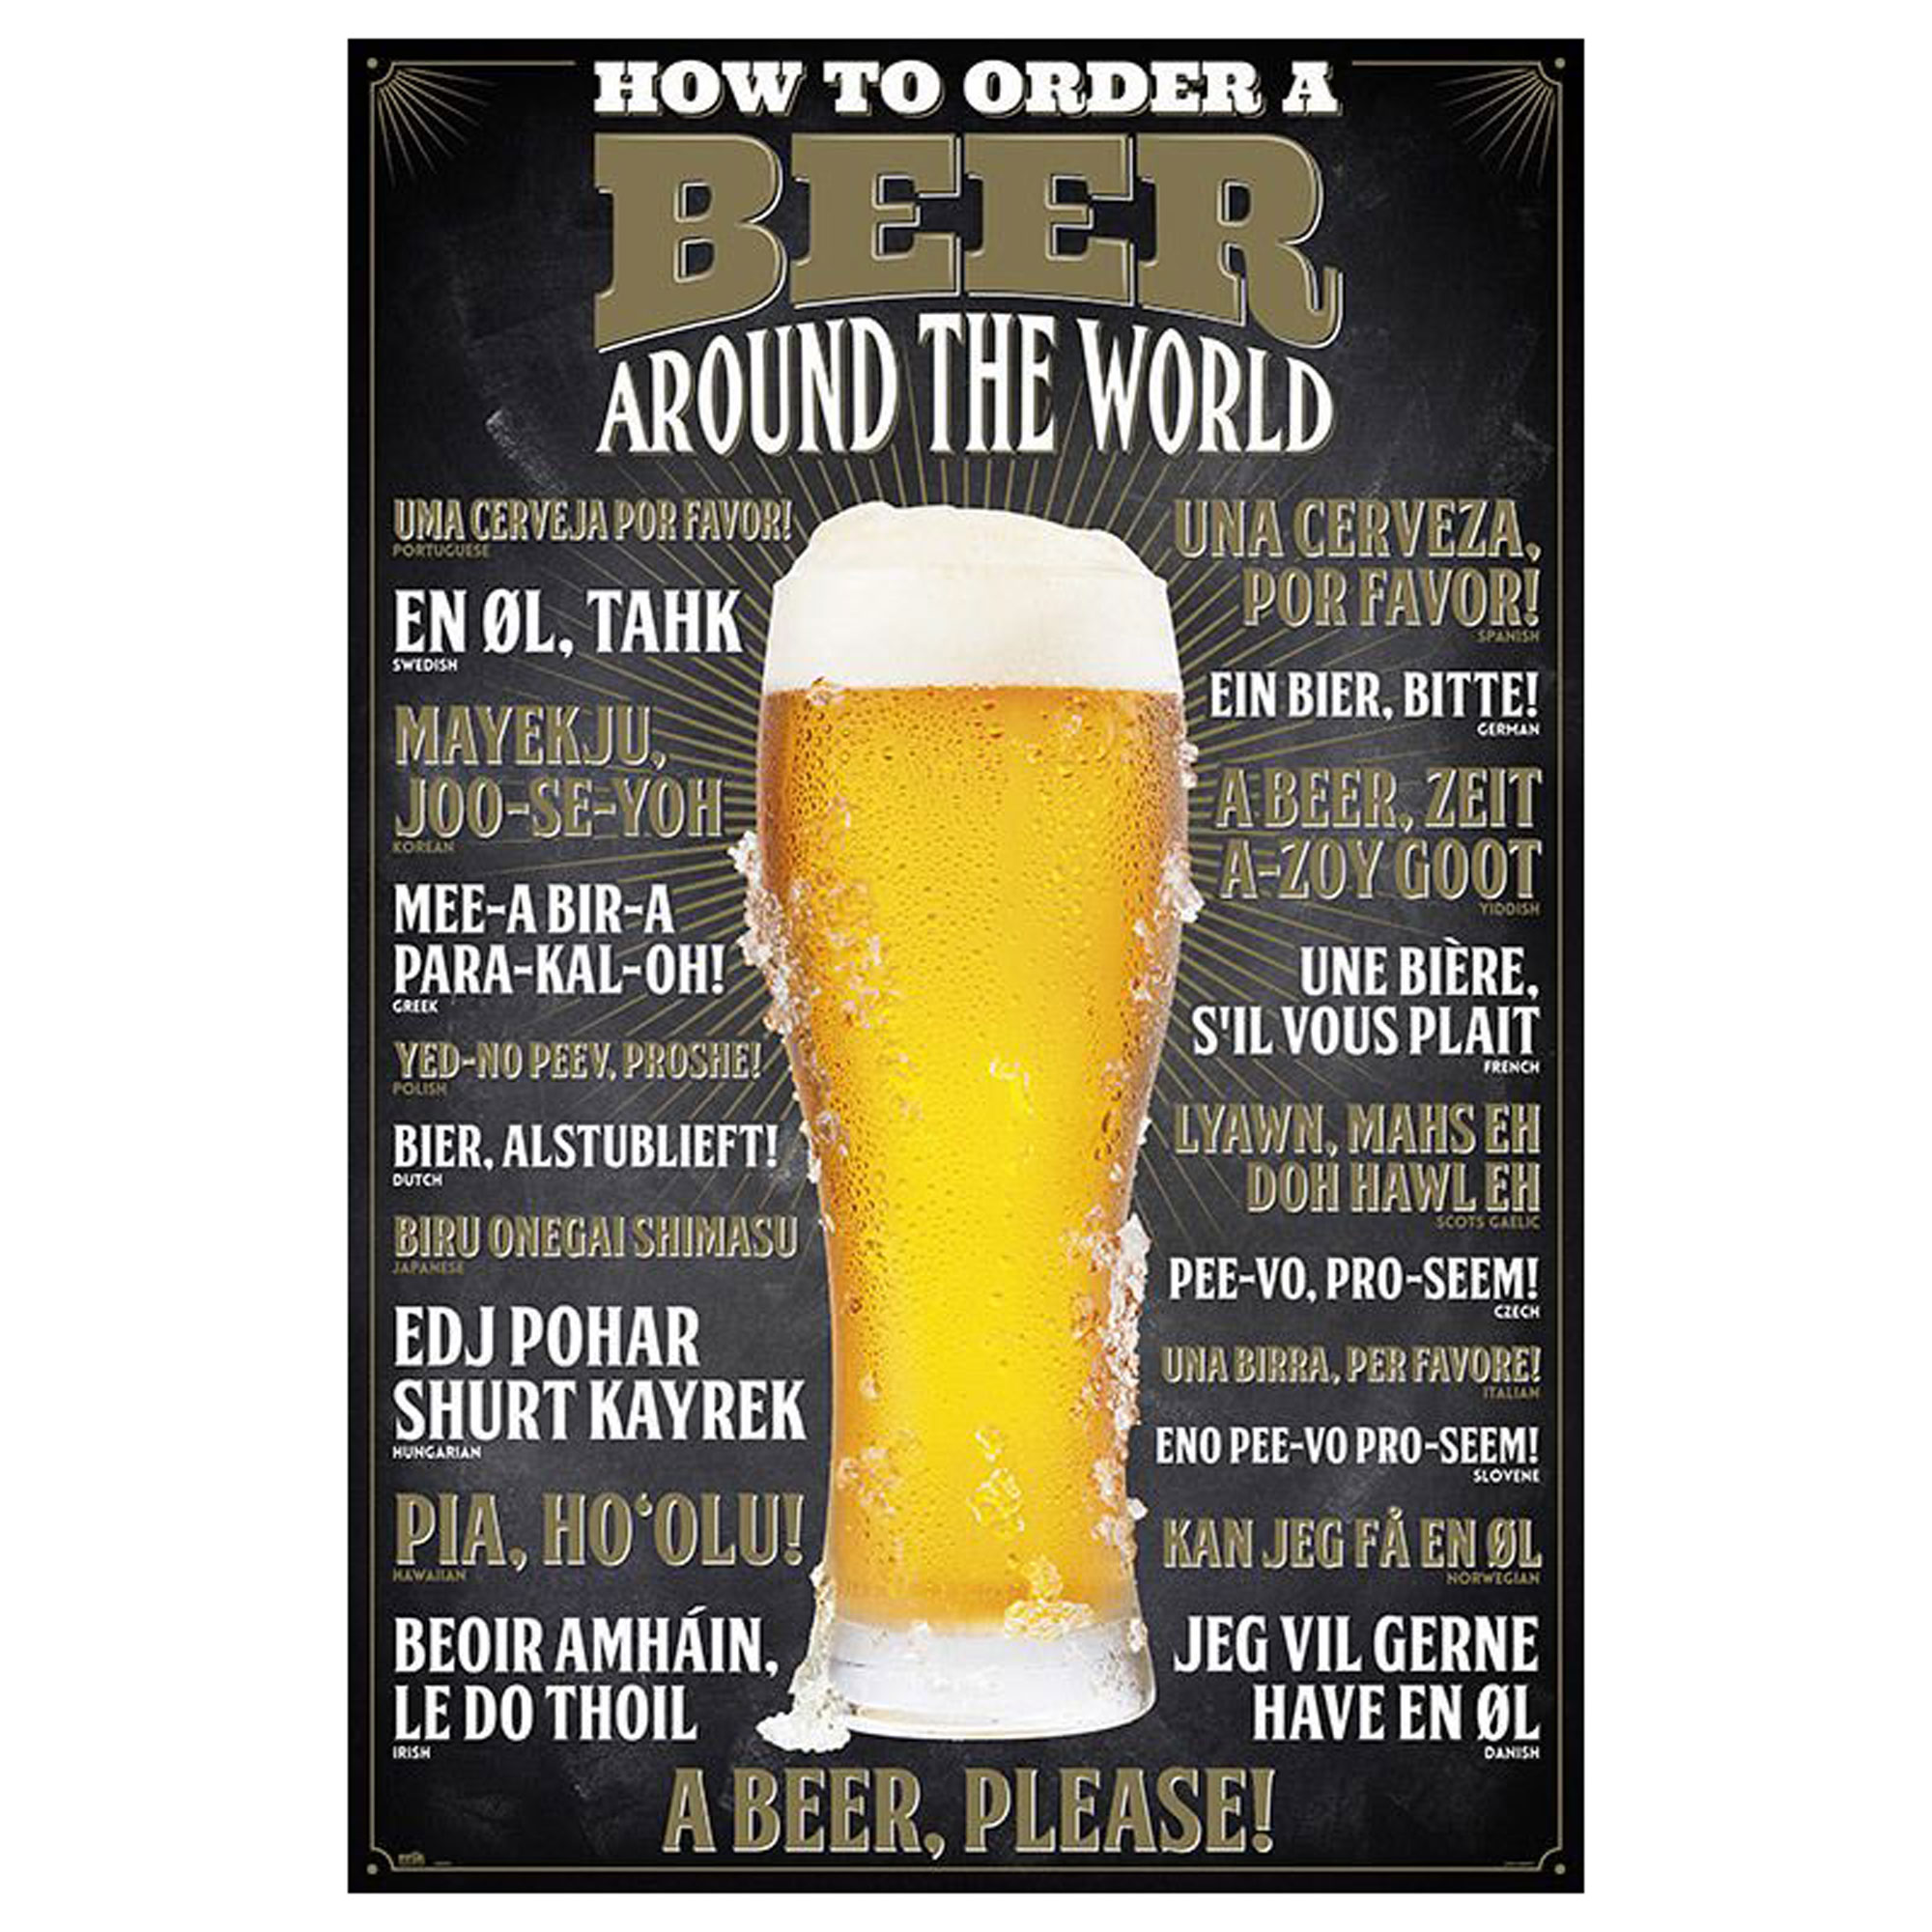 Beer - order World - How Around the to